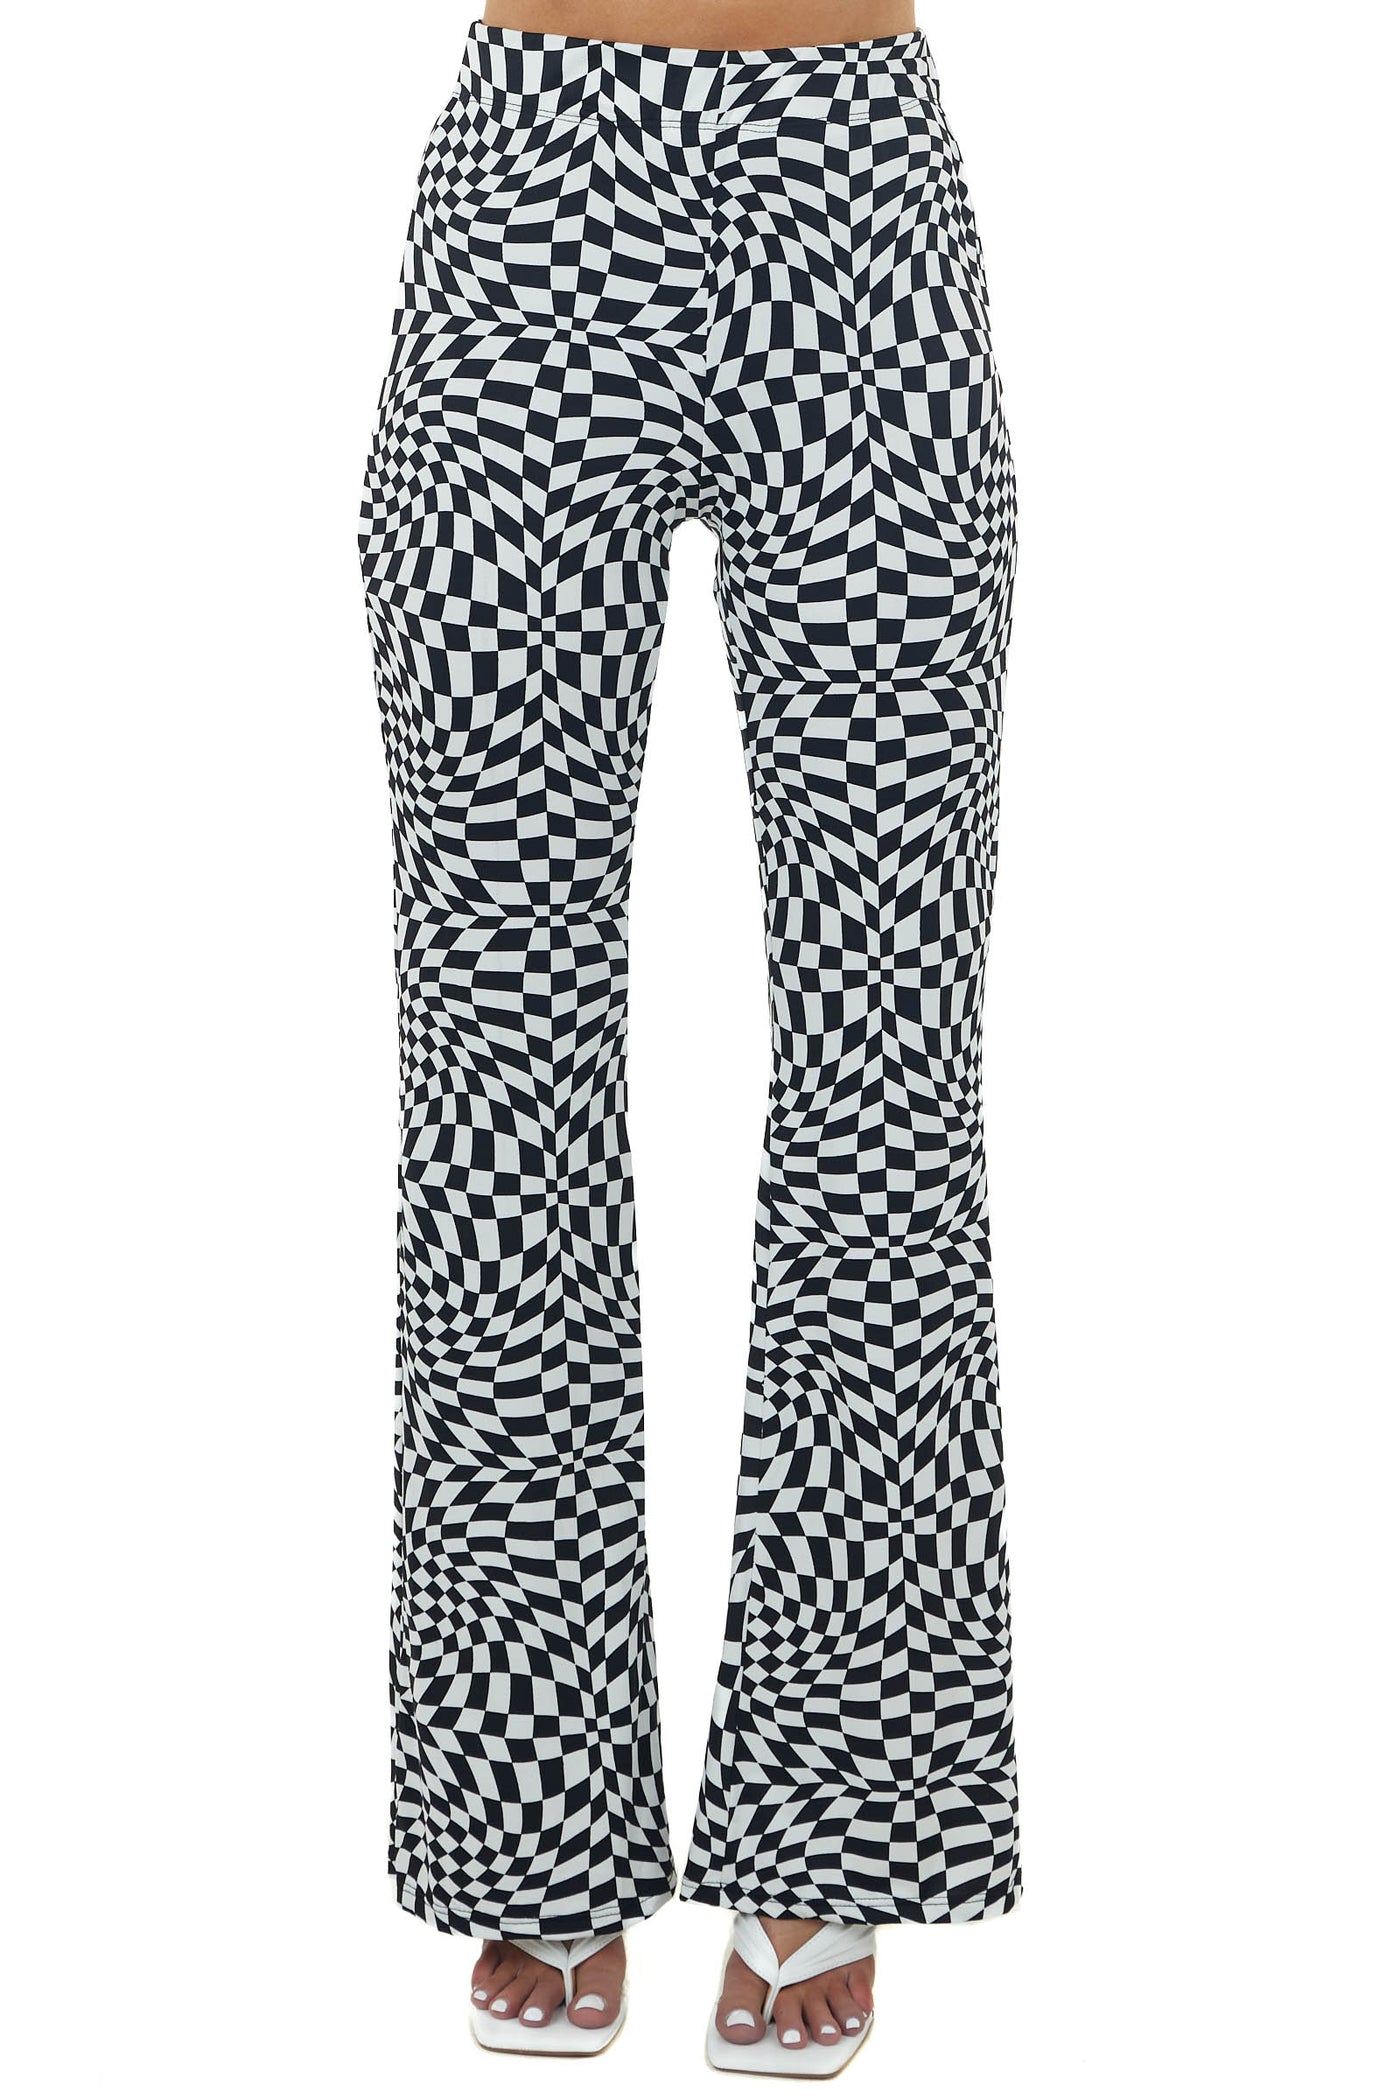 Black and Off White Abstract Checkered Print Pants